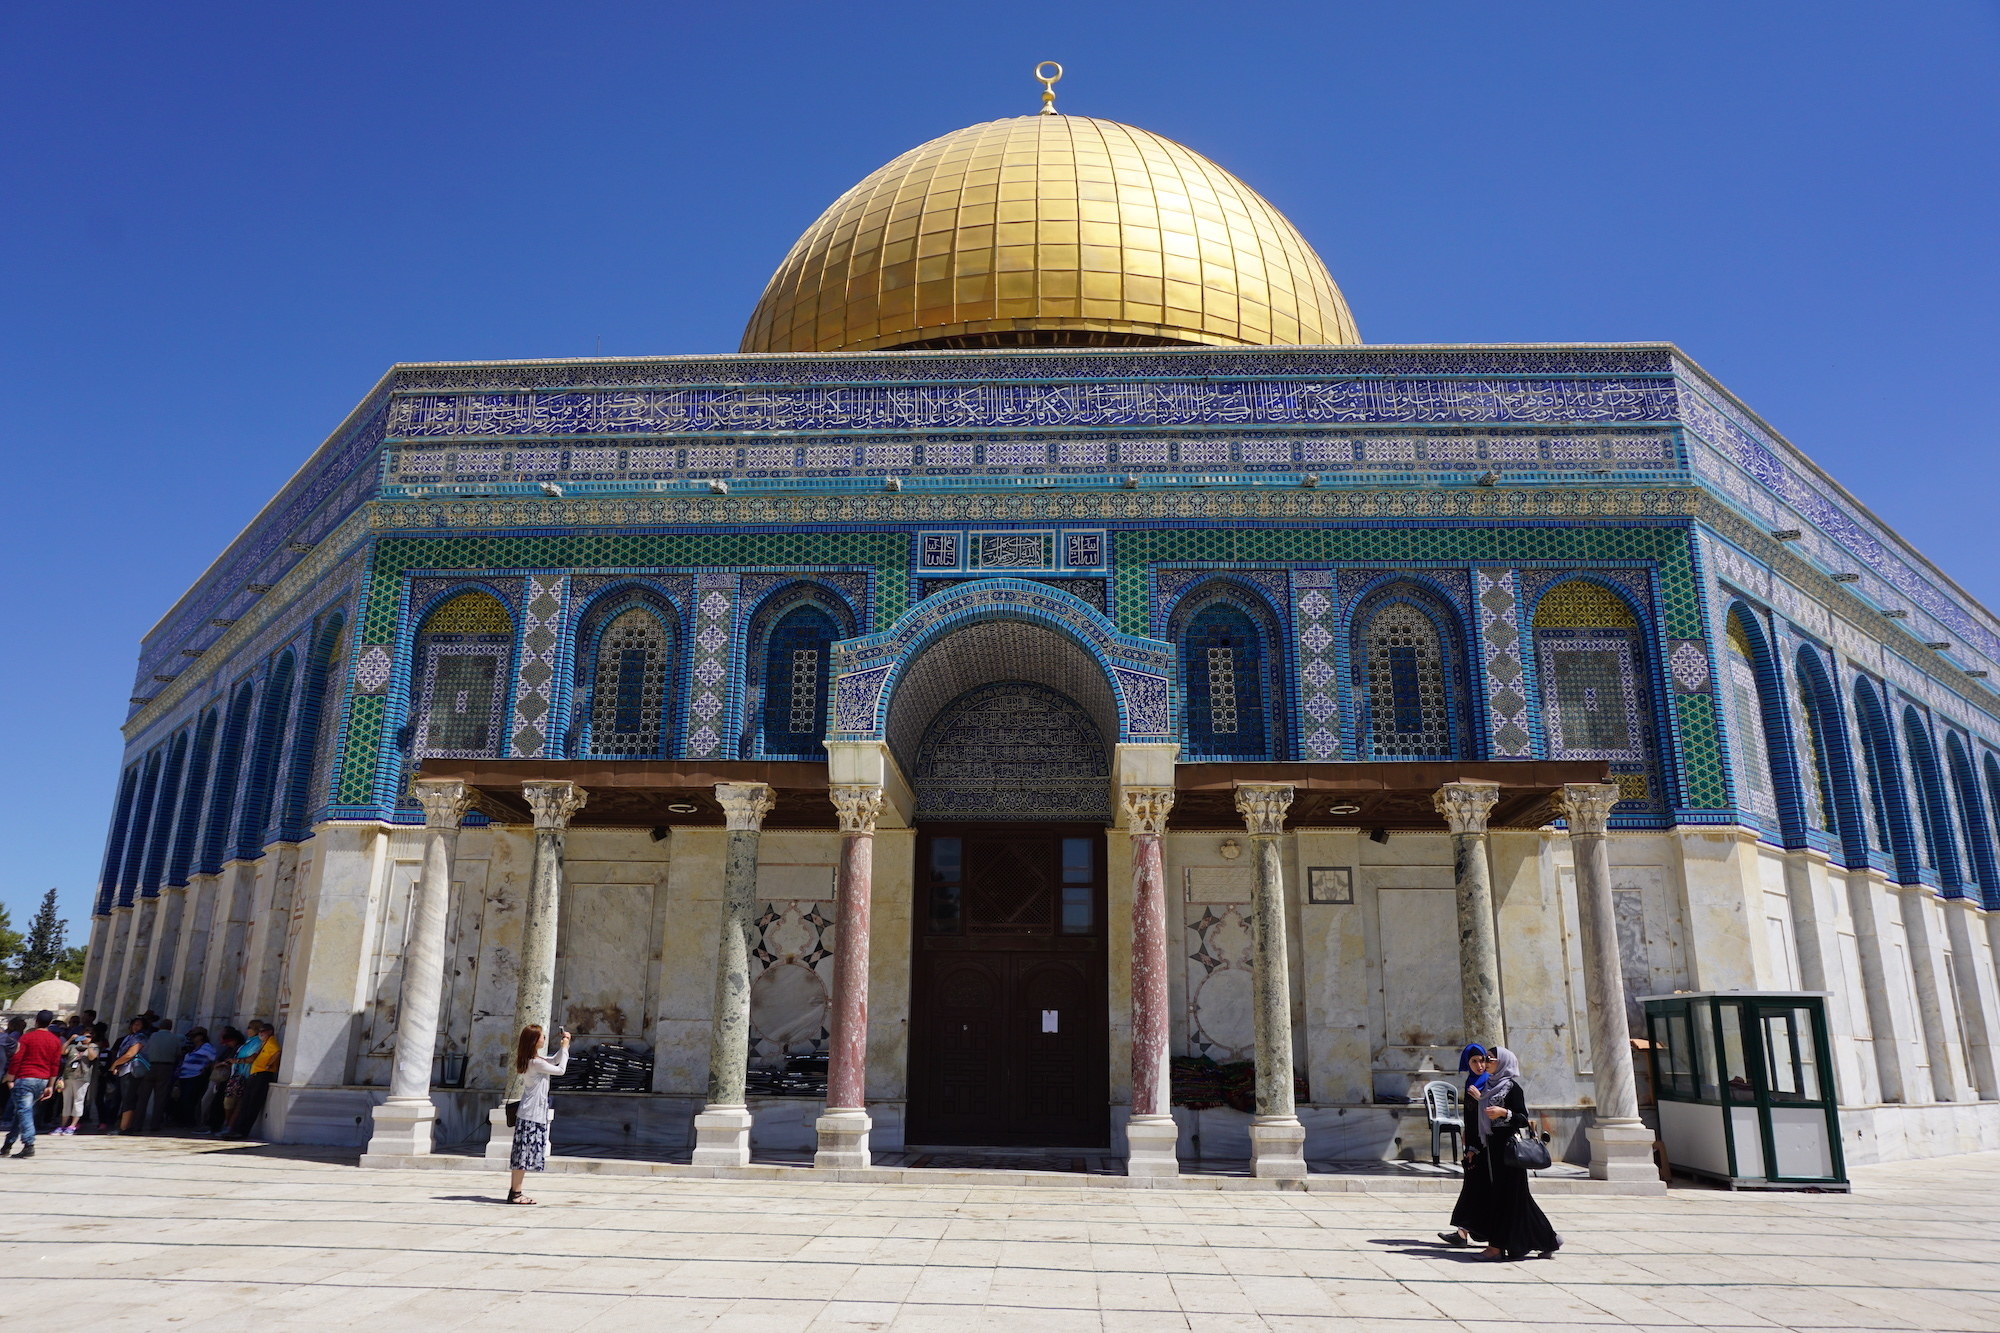 Dome of the Rock building in Jerusalem